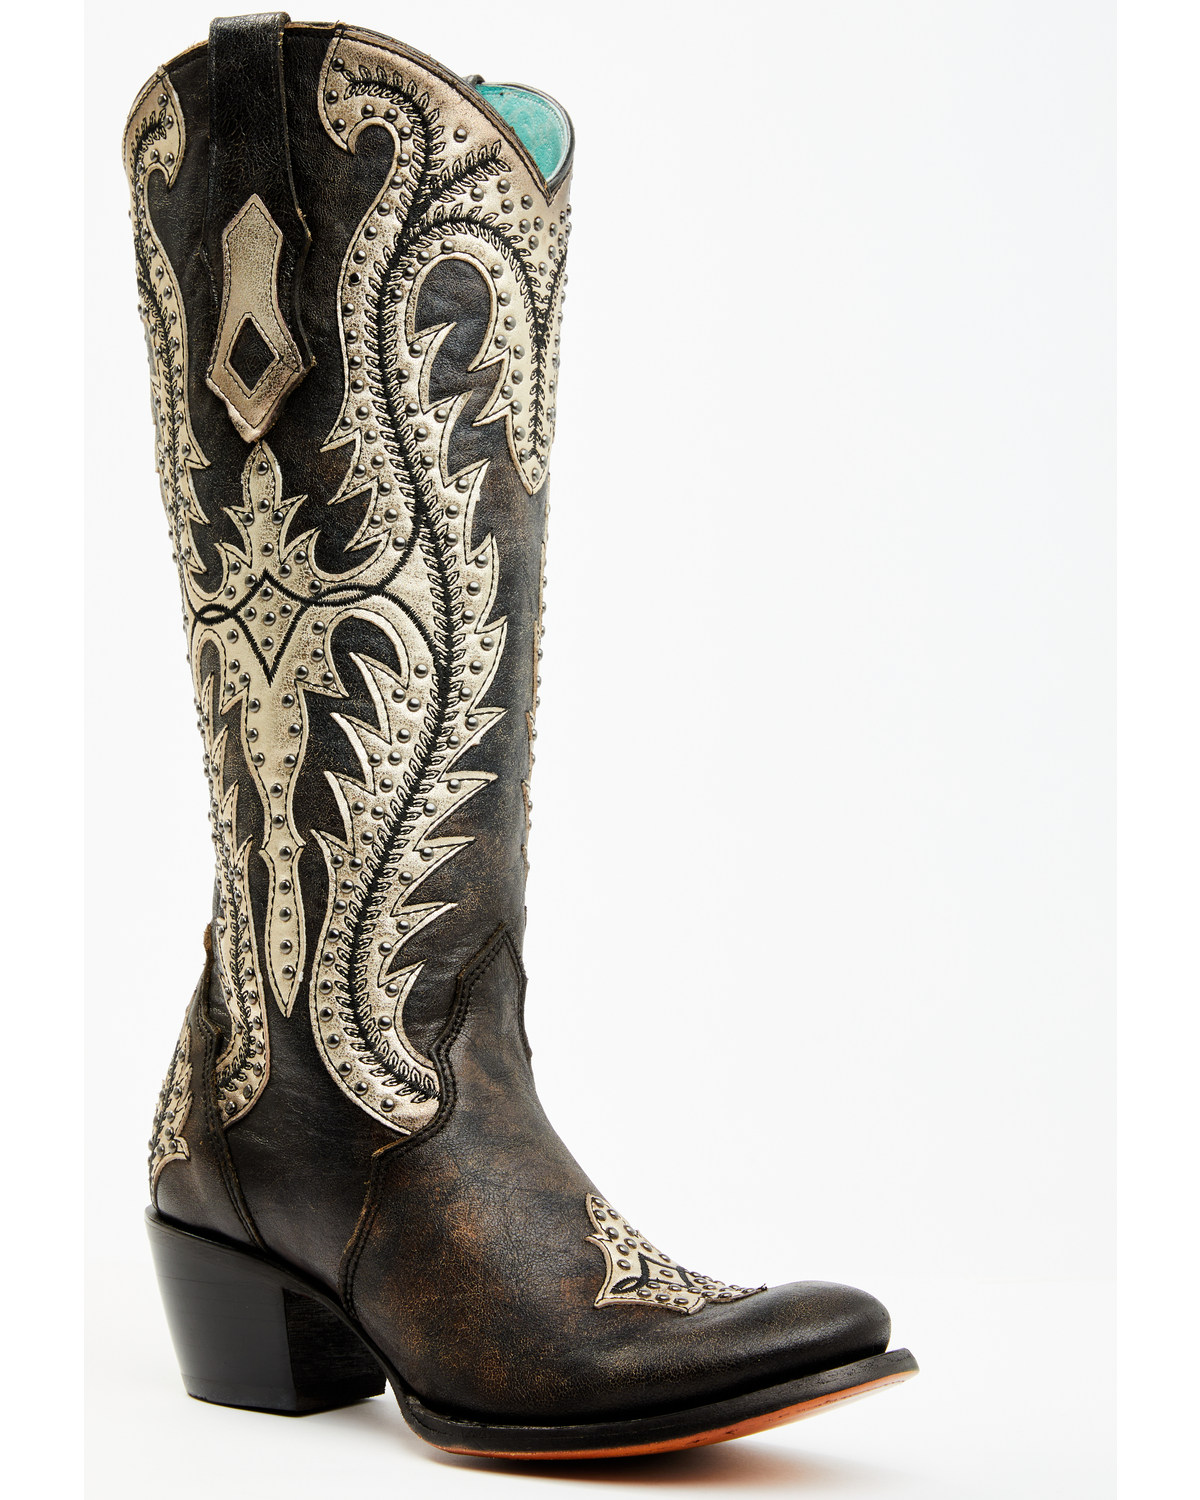 Corral Women's Studded Overlay Western Boots - Round Toe